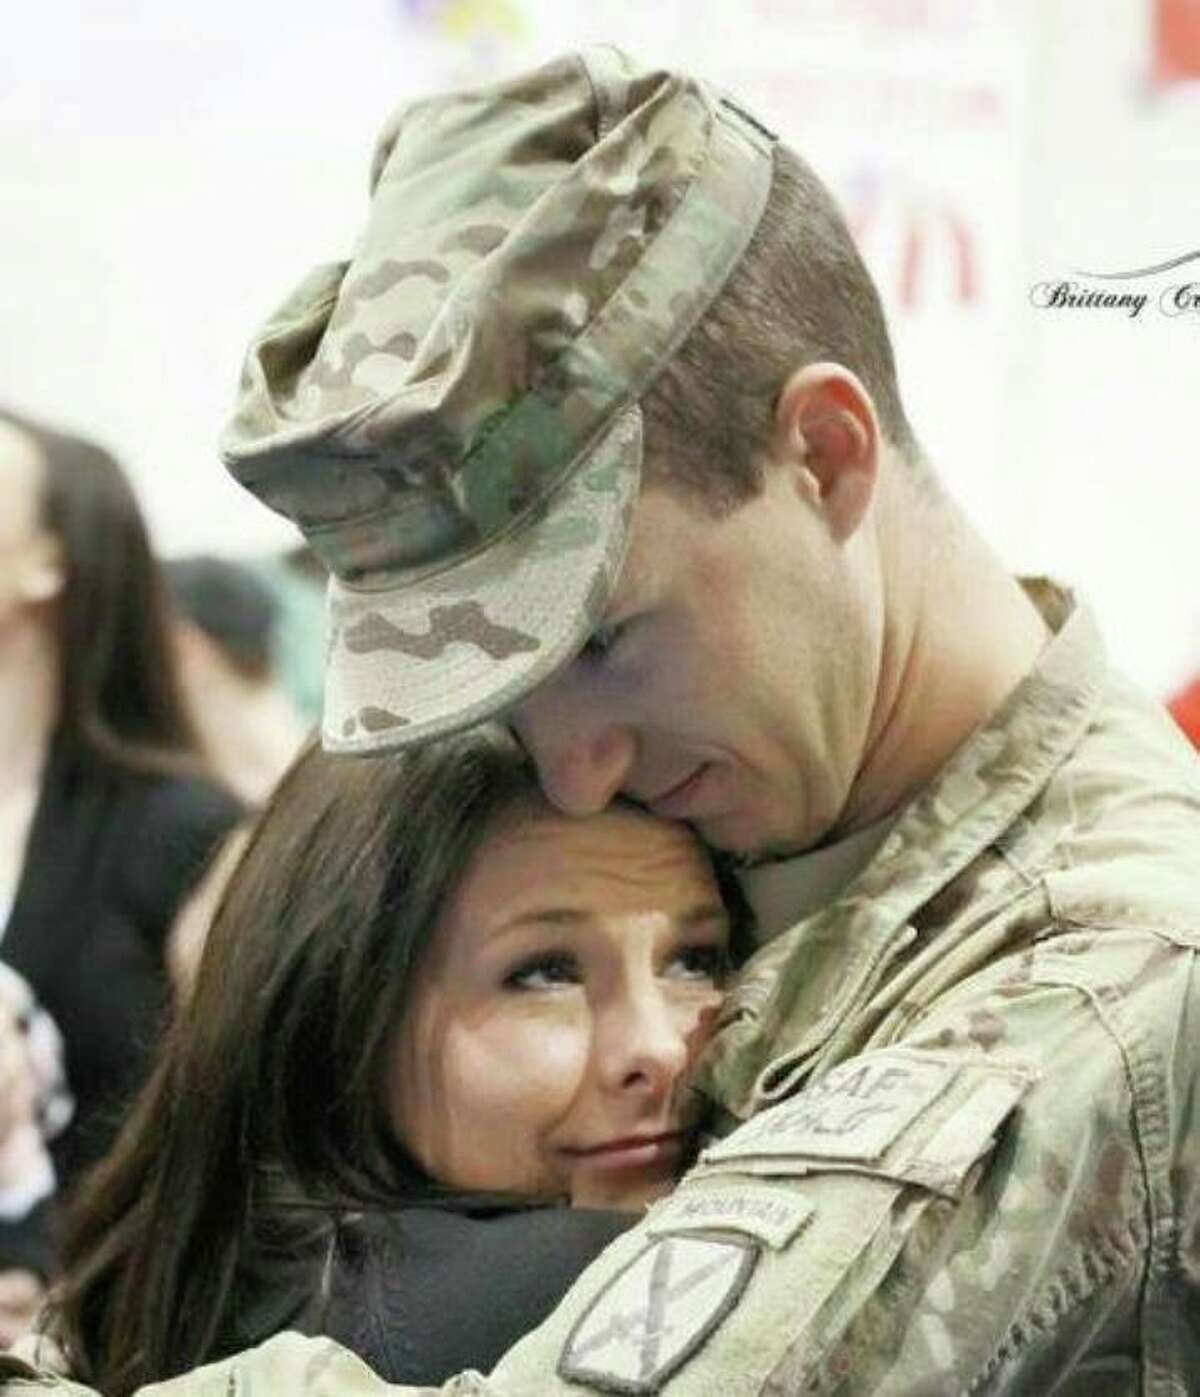 Sgt. M. Joshua Laughery embraces his wife Ashley when he returned from Afghanistan.